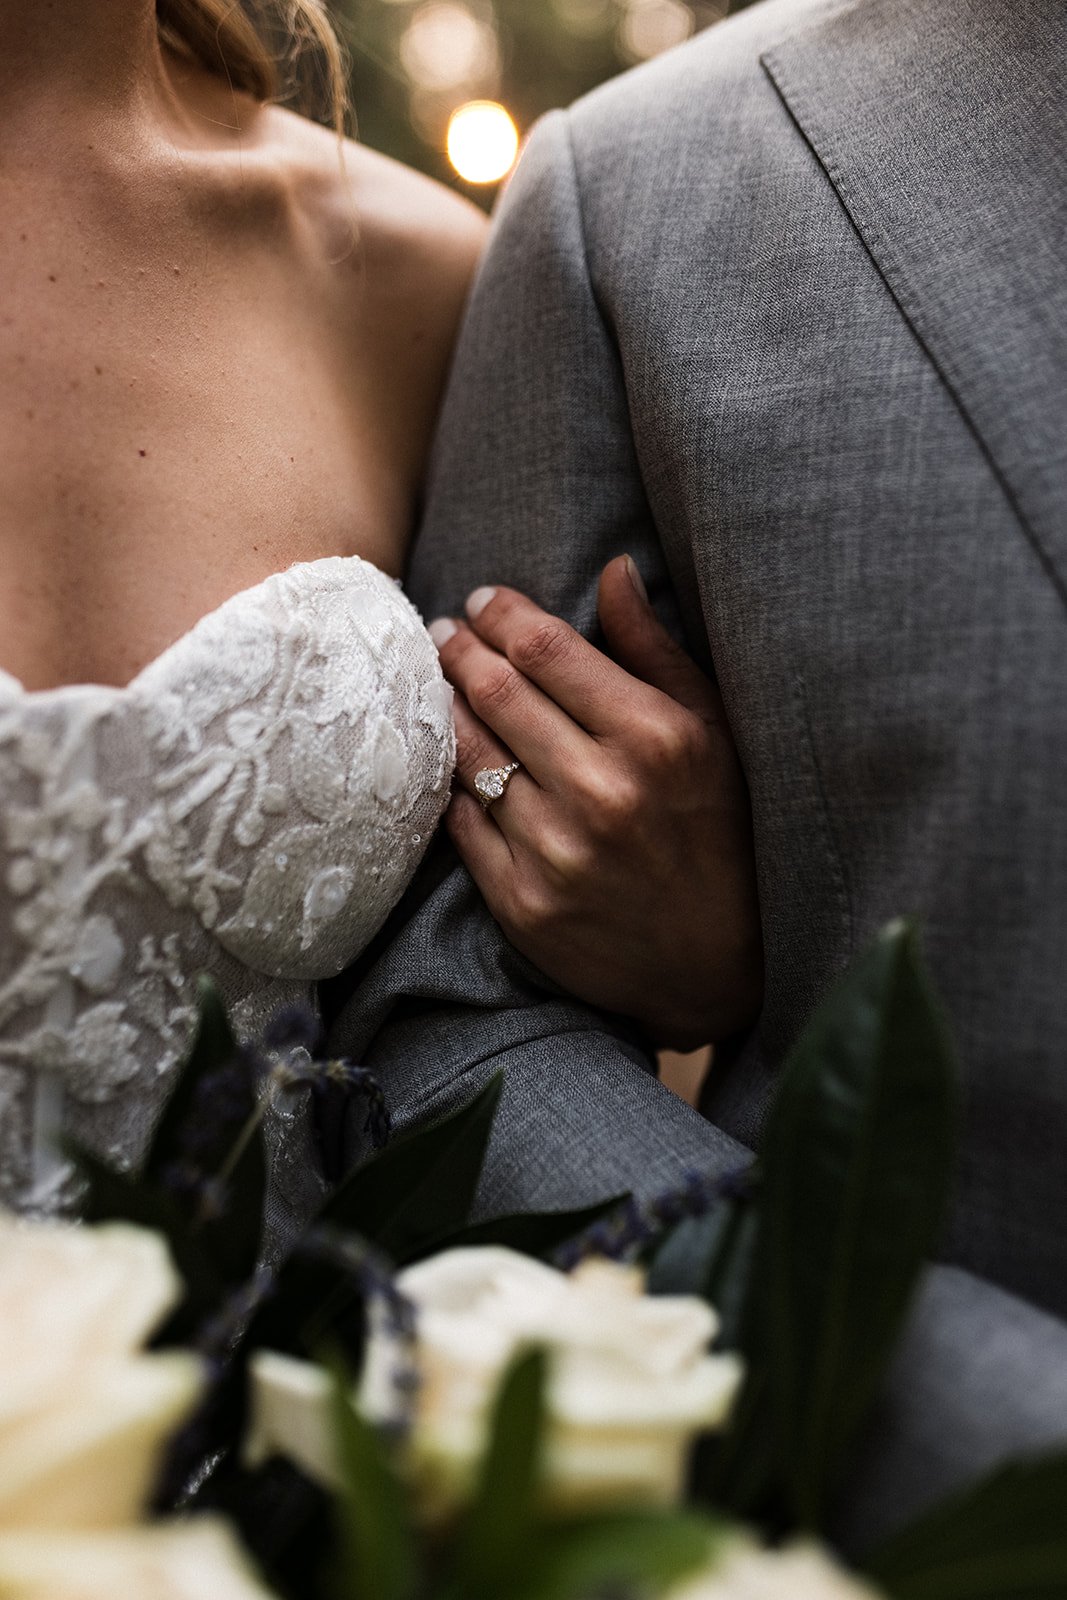  An up close photograph of a bride wearing Made With Love Penny wedding dress, which has a strapless bustier bodice and 3D lace appliqués over a nude lining. She is wearing an oval cute diamond engagement ring with her hand looped through the grooms 